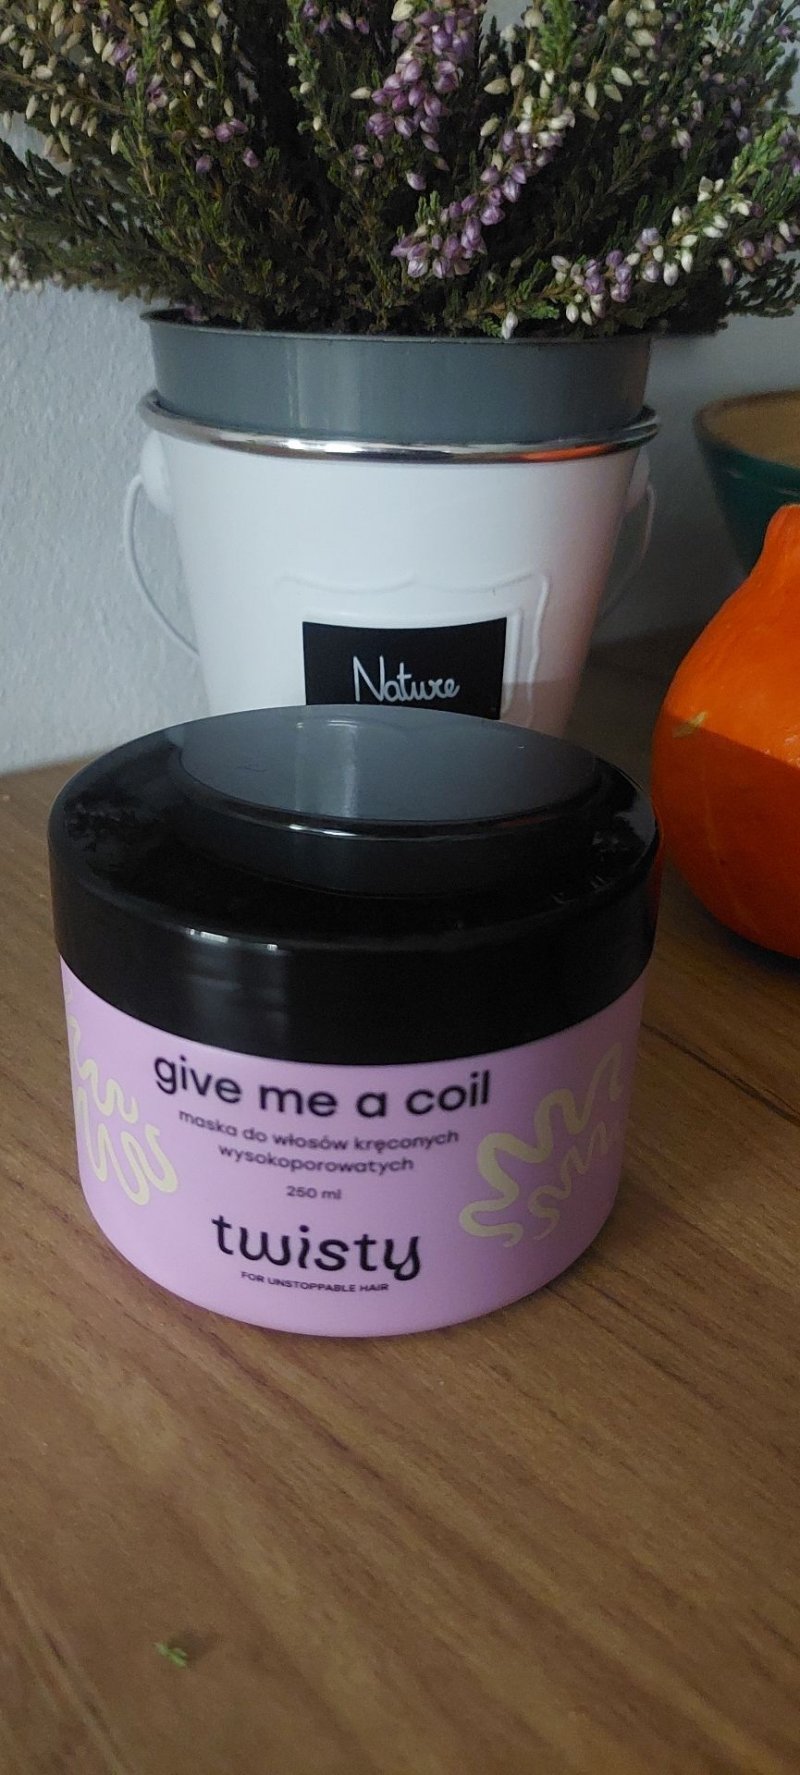 Twisty, Give Me a Coil, emollient hair mask